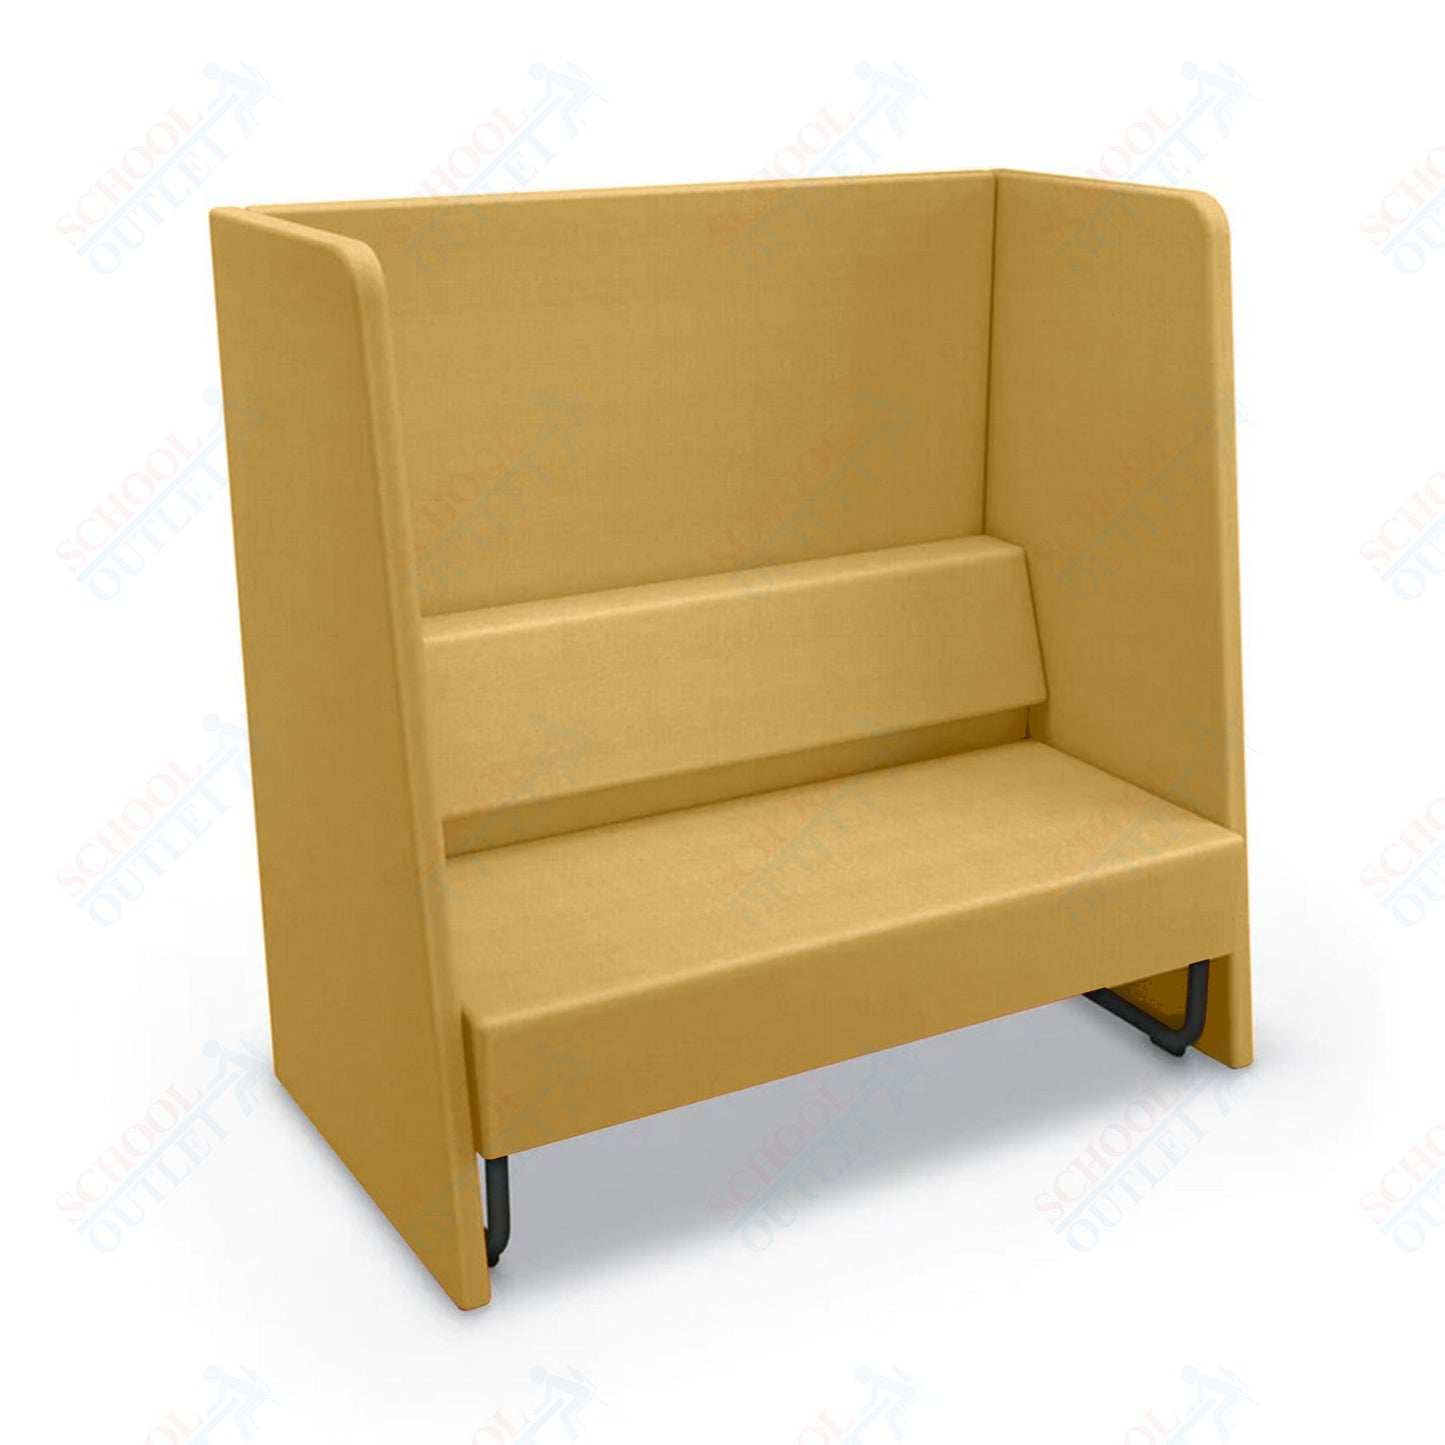 Mooreco Akt Soft Seating Lounge High Back Loveseat - Grade 02 Fabric and Powder Coated Sled Legs